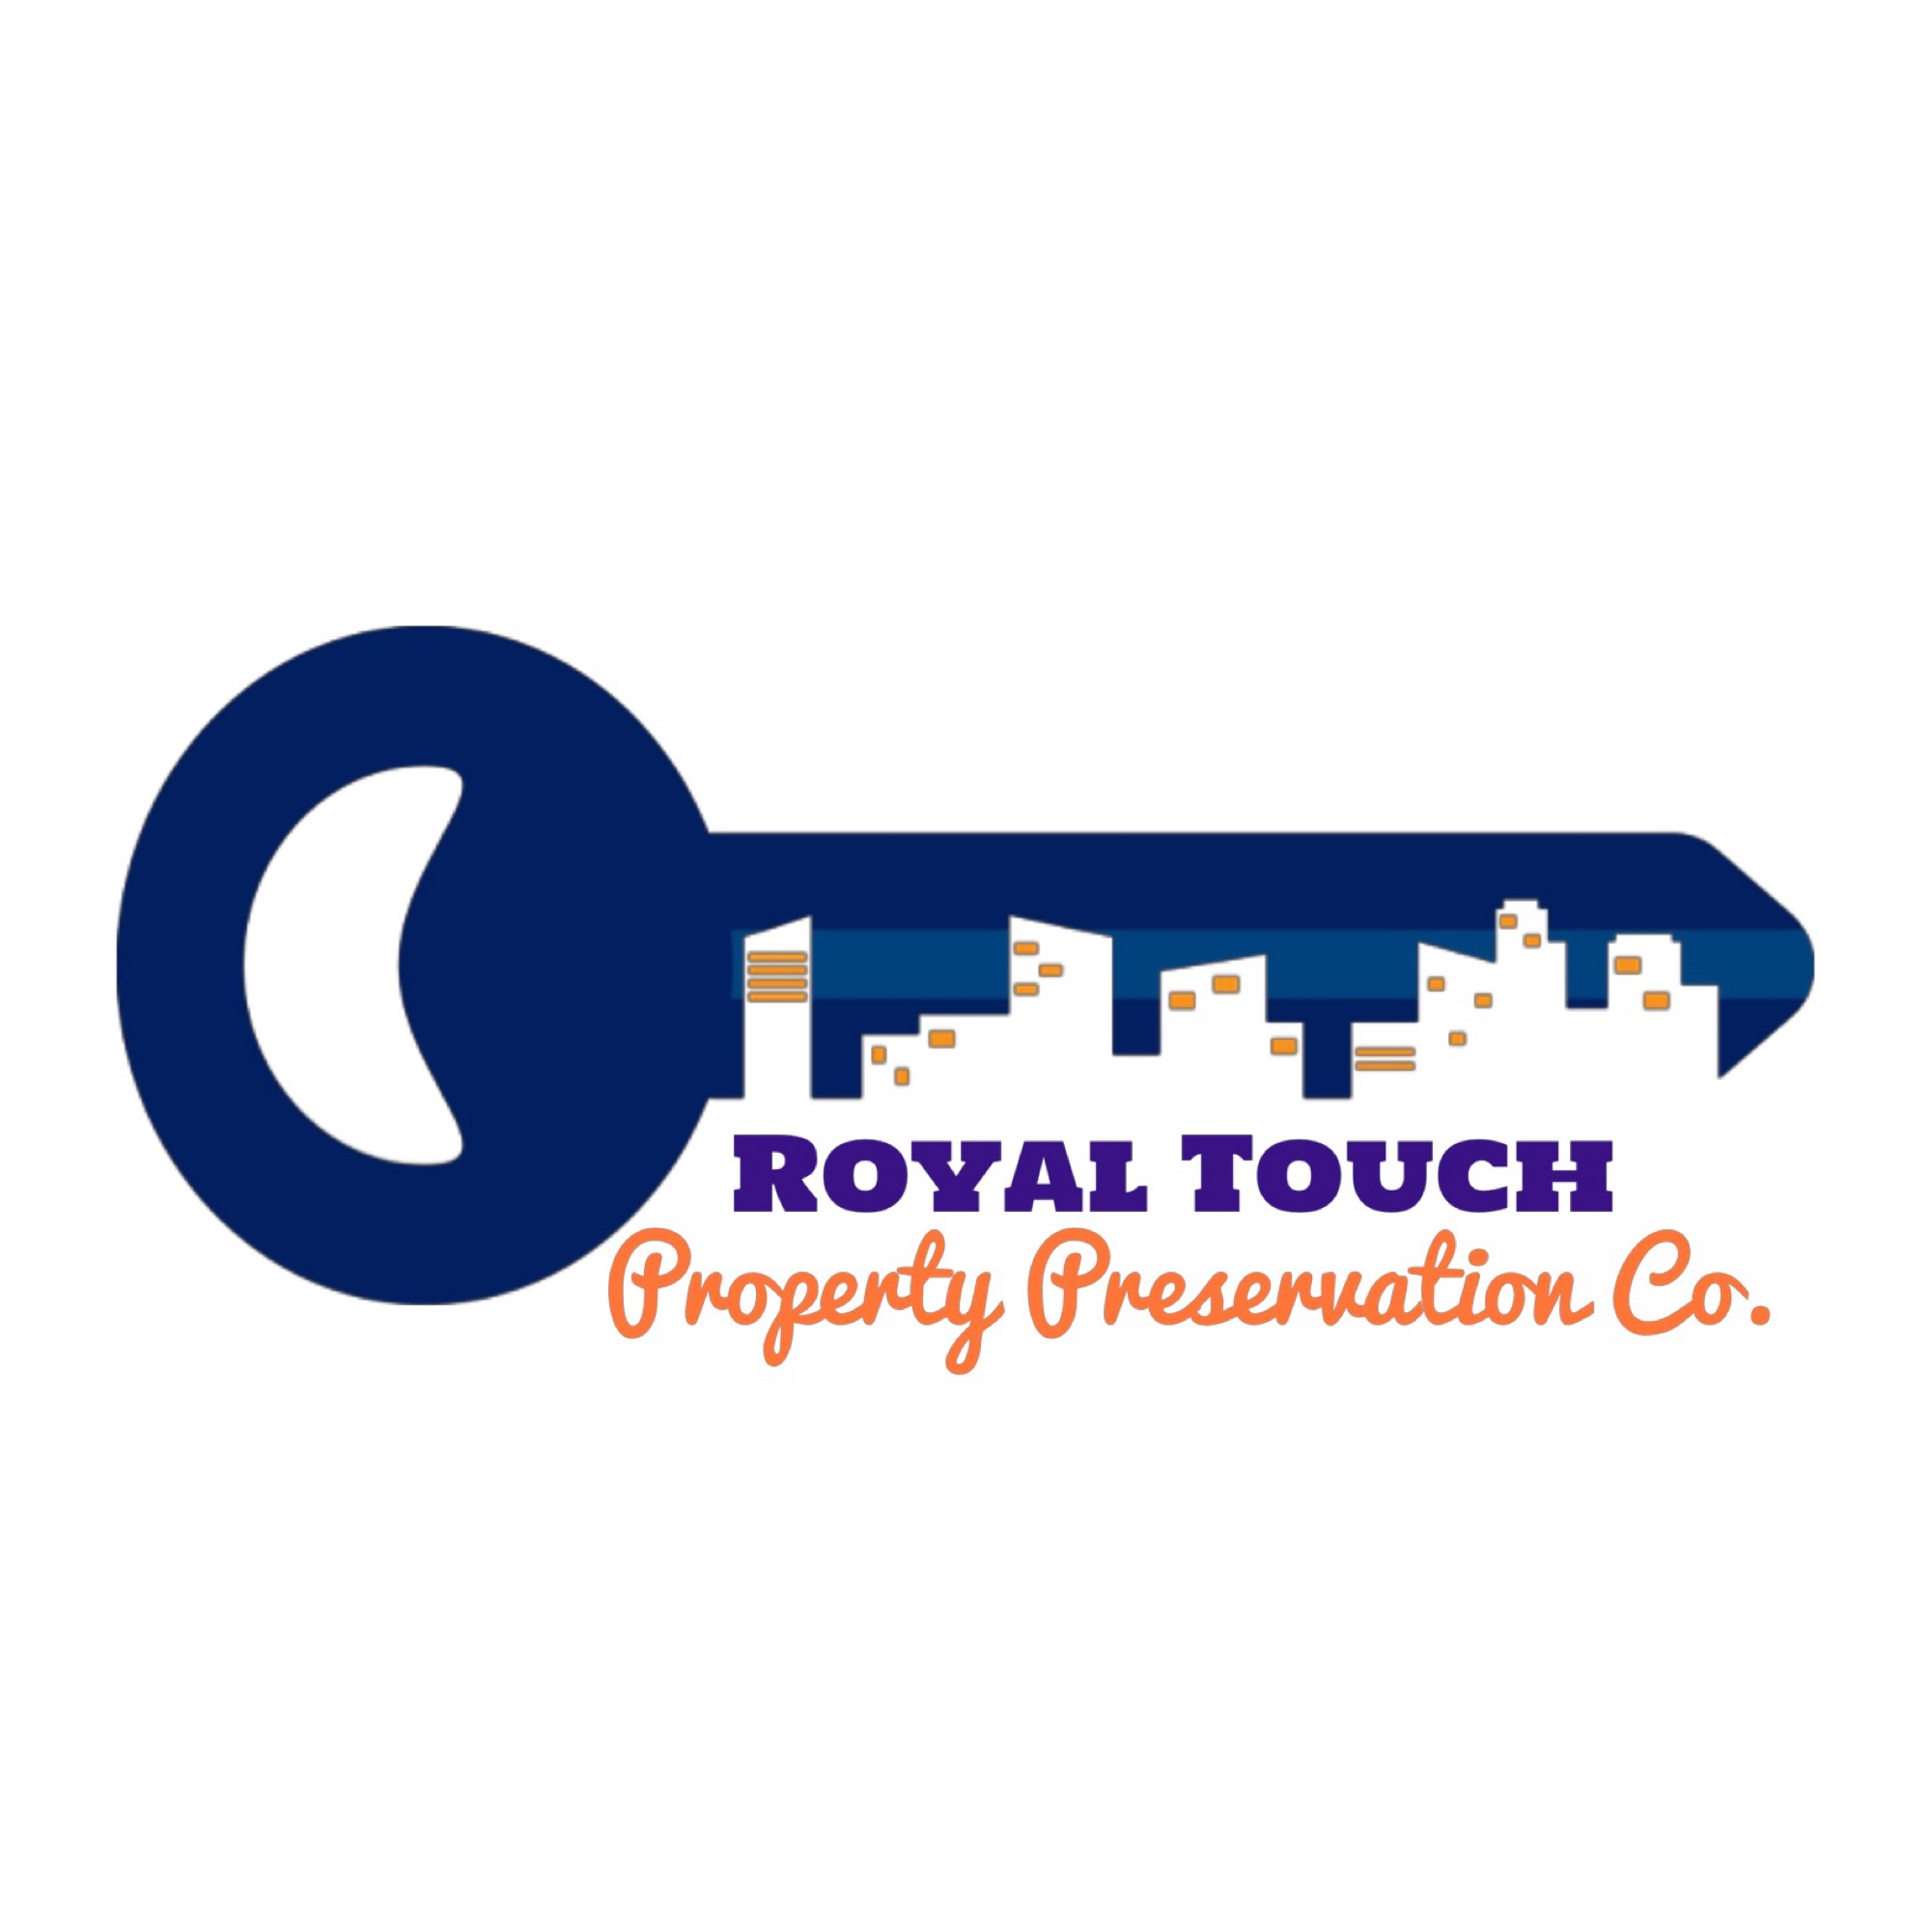 Royal Touch Property Preservation Co. and Home Improvements Logo